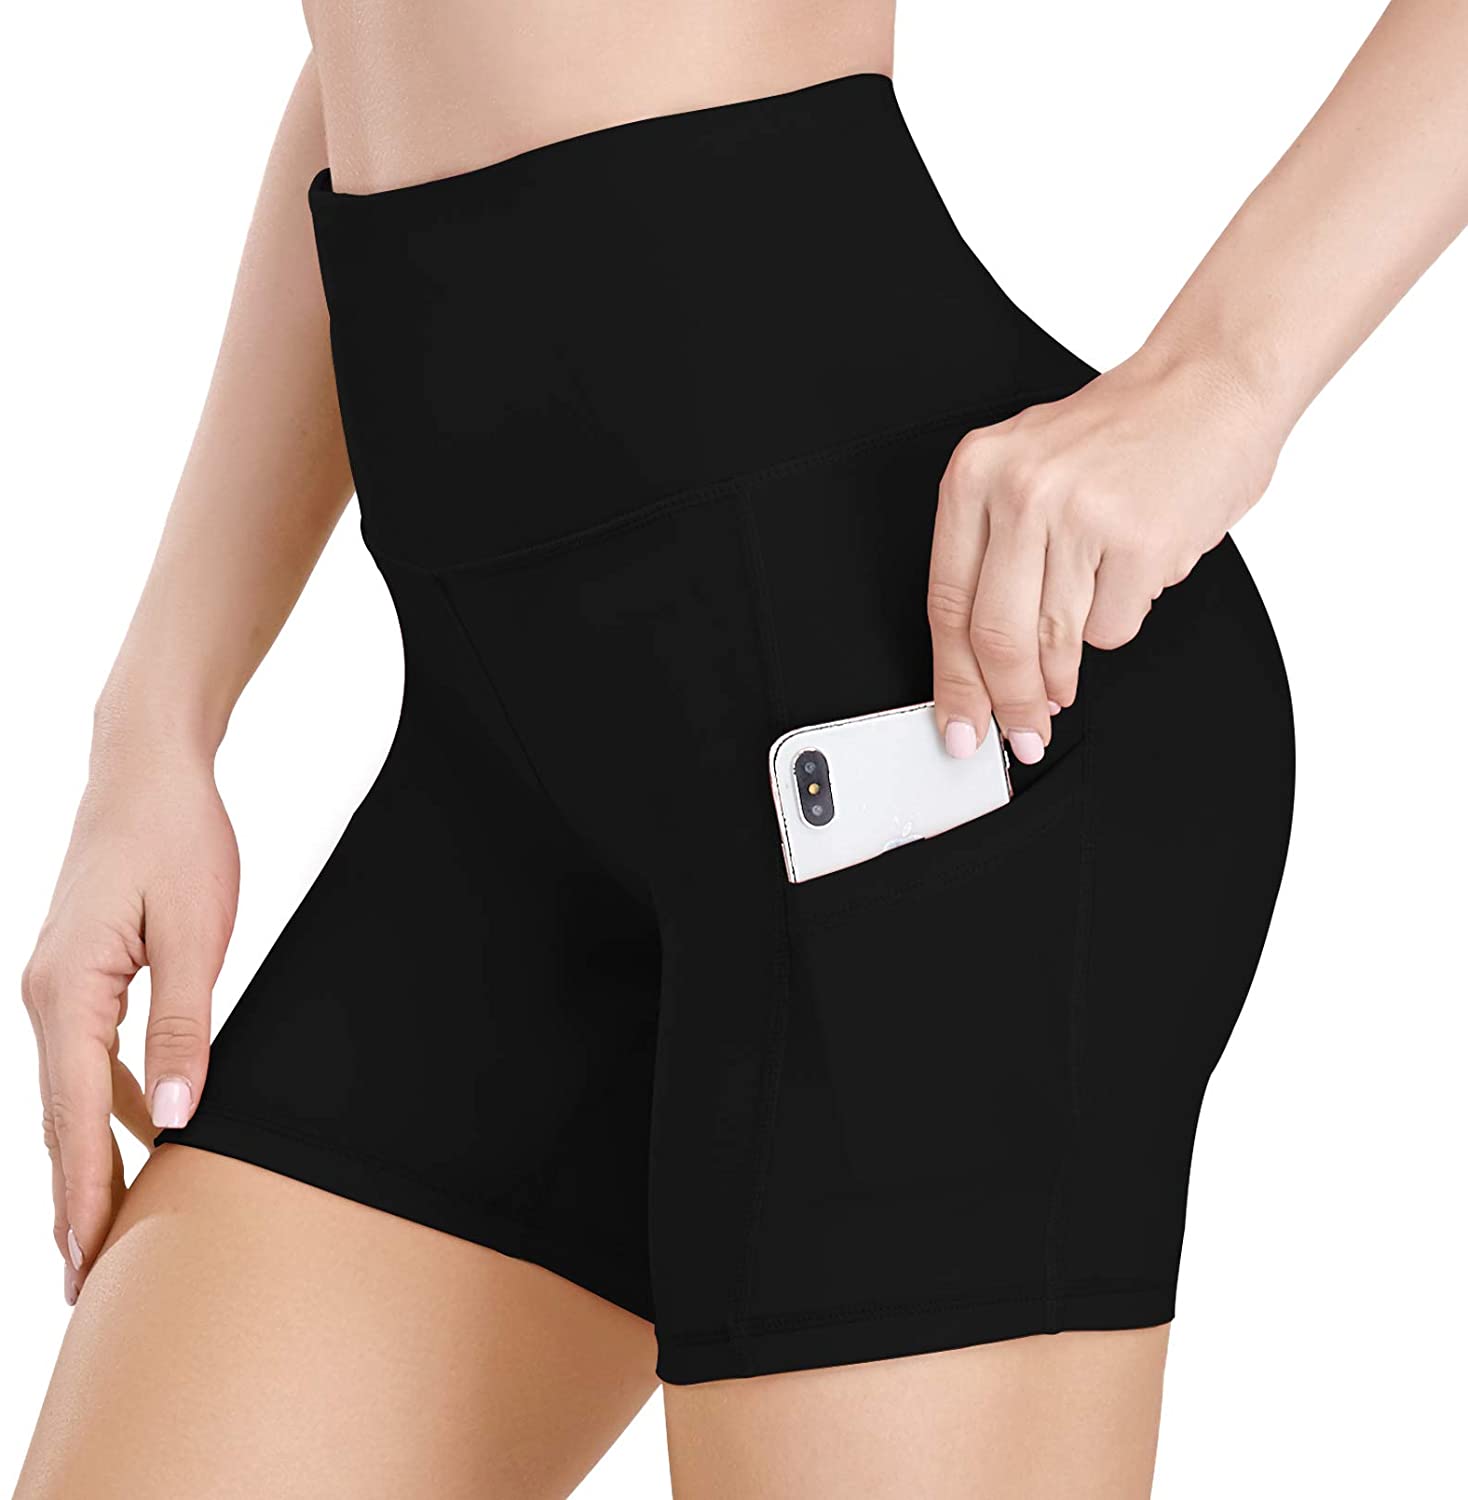 RIMLESS 7 High Waist Yoga Shorts for Women Tummy Control Athletic Workout Running Shorts with Side Pockets 